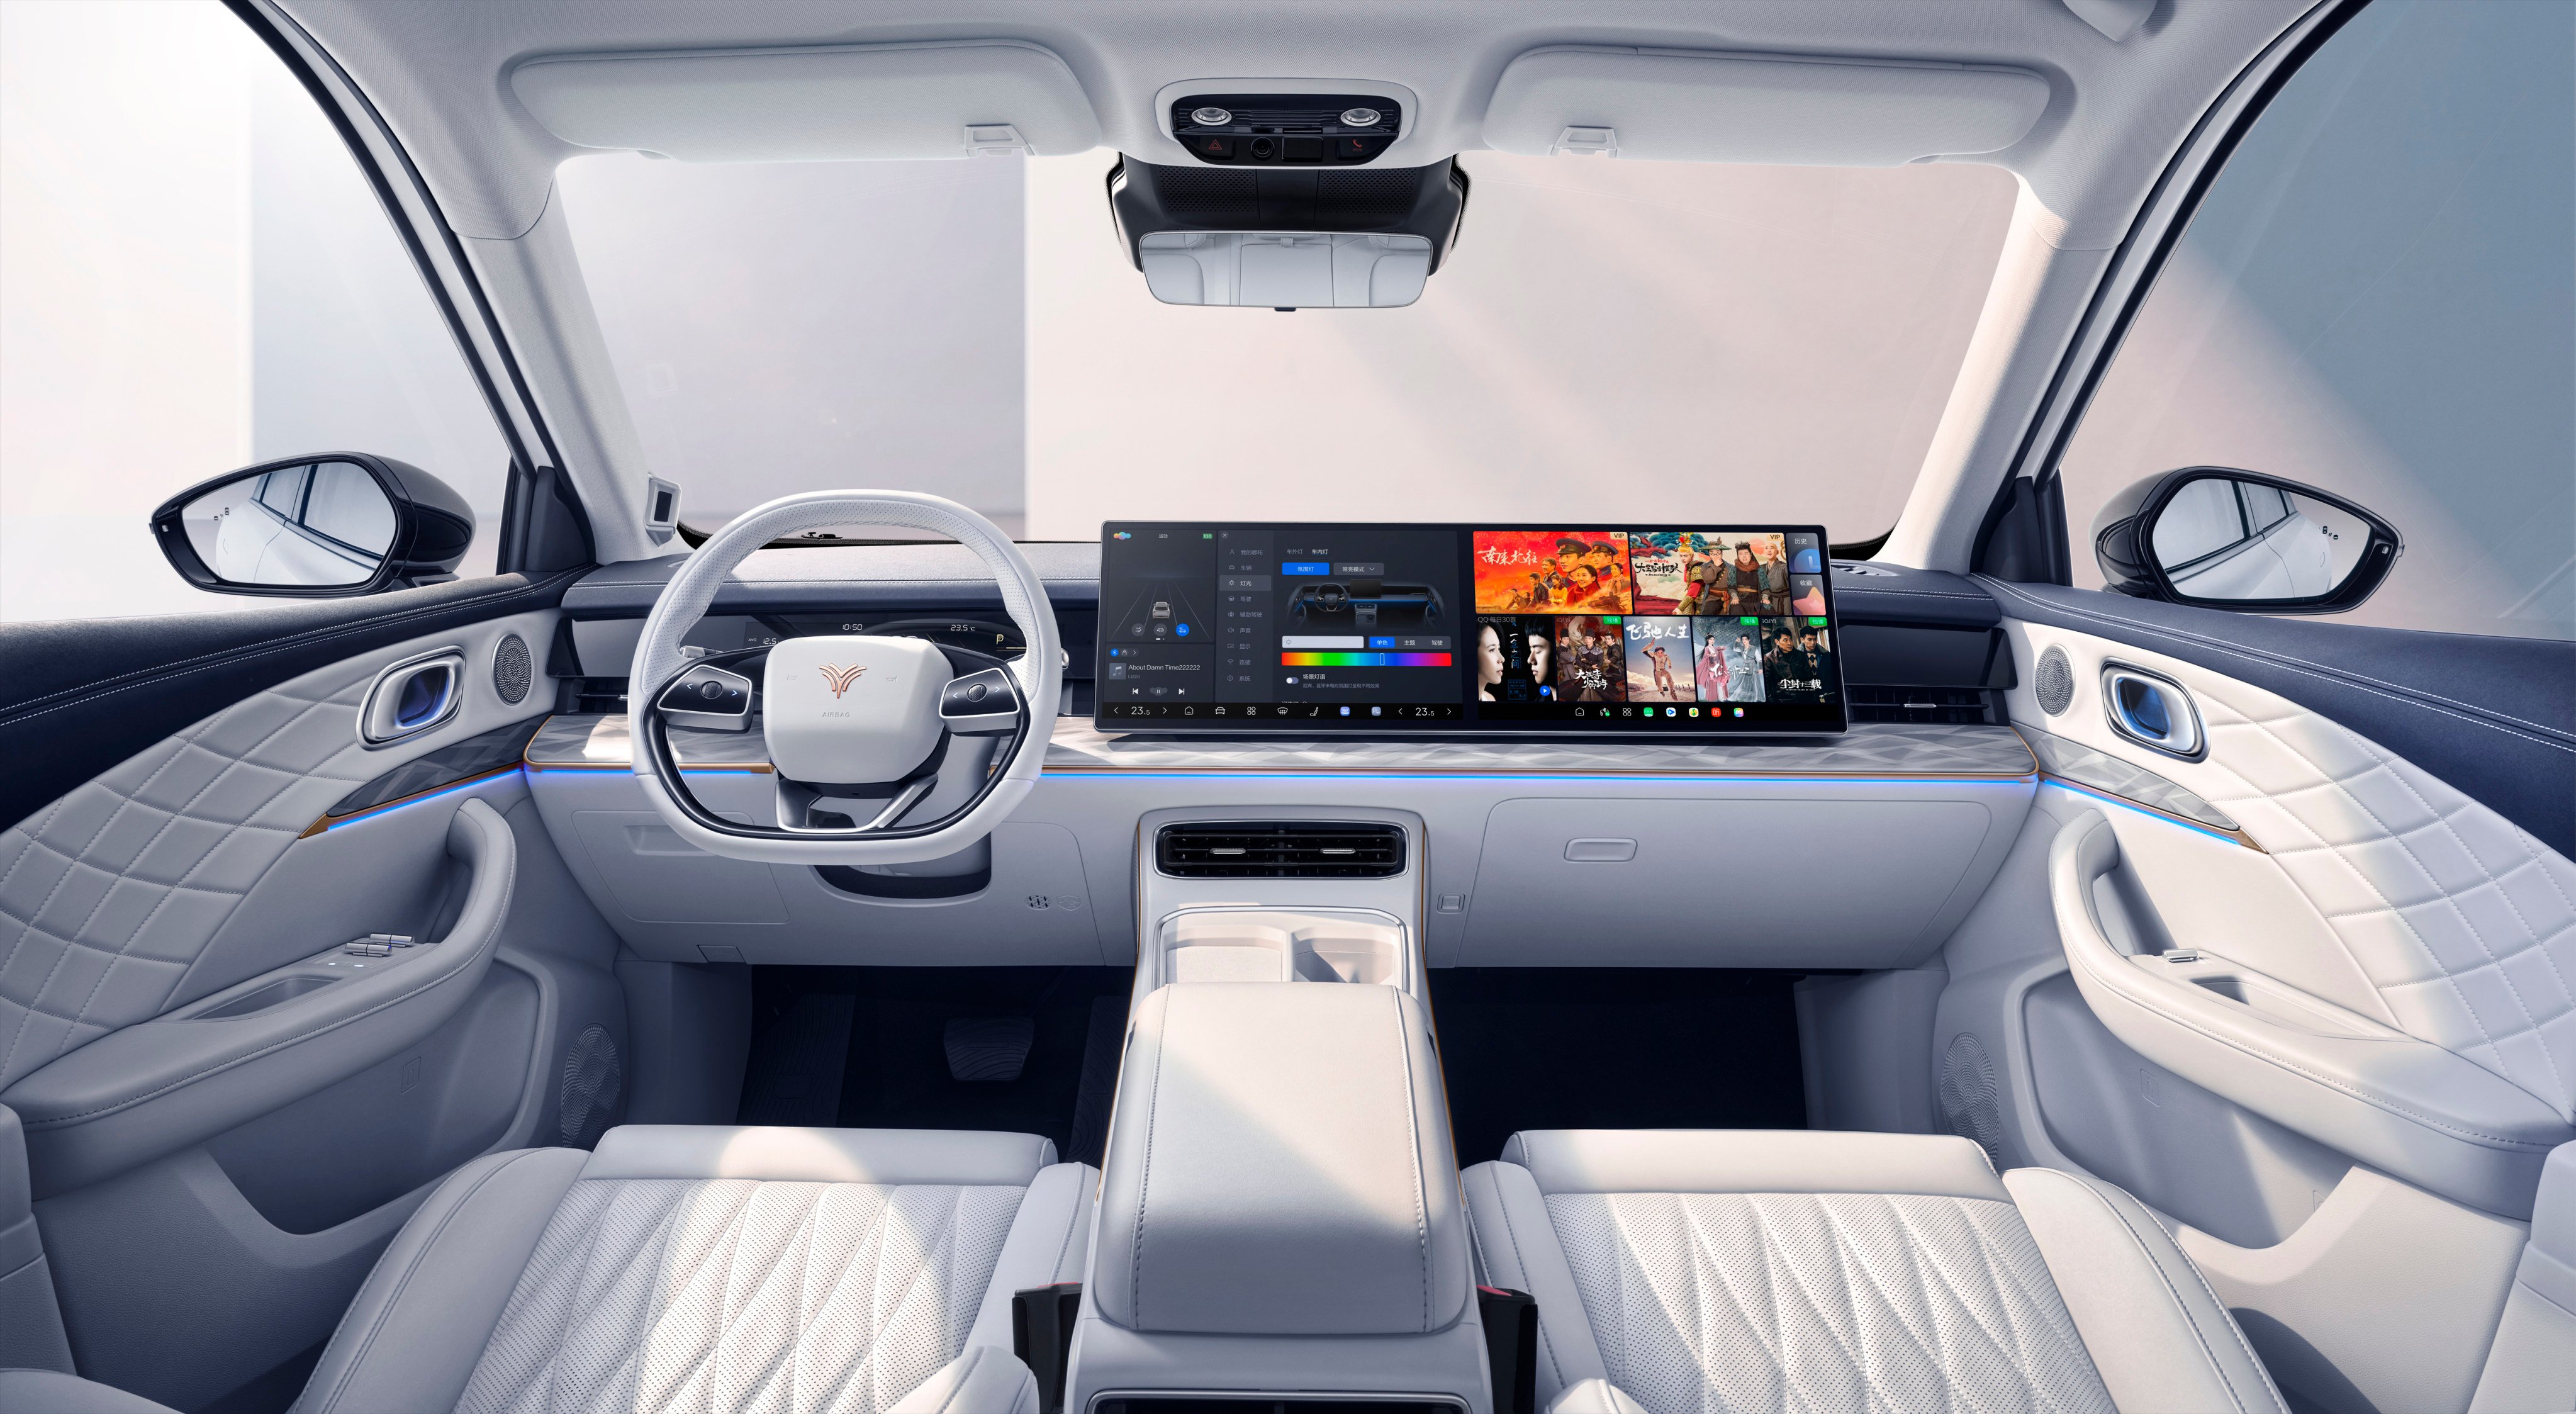 This year, mainland Chinese brand Neta Auto has launched its latest electric car, Neta L – equipped with features such as an intelligent cockpit and autonomous driving.